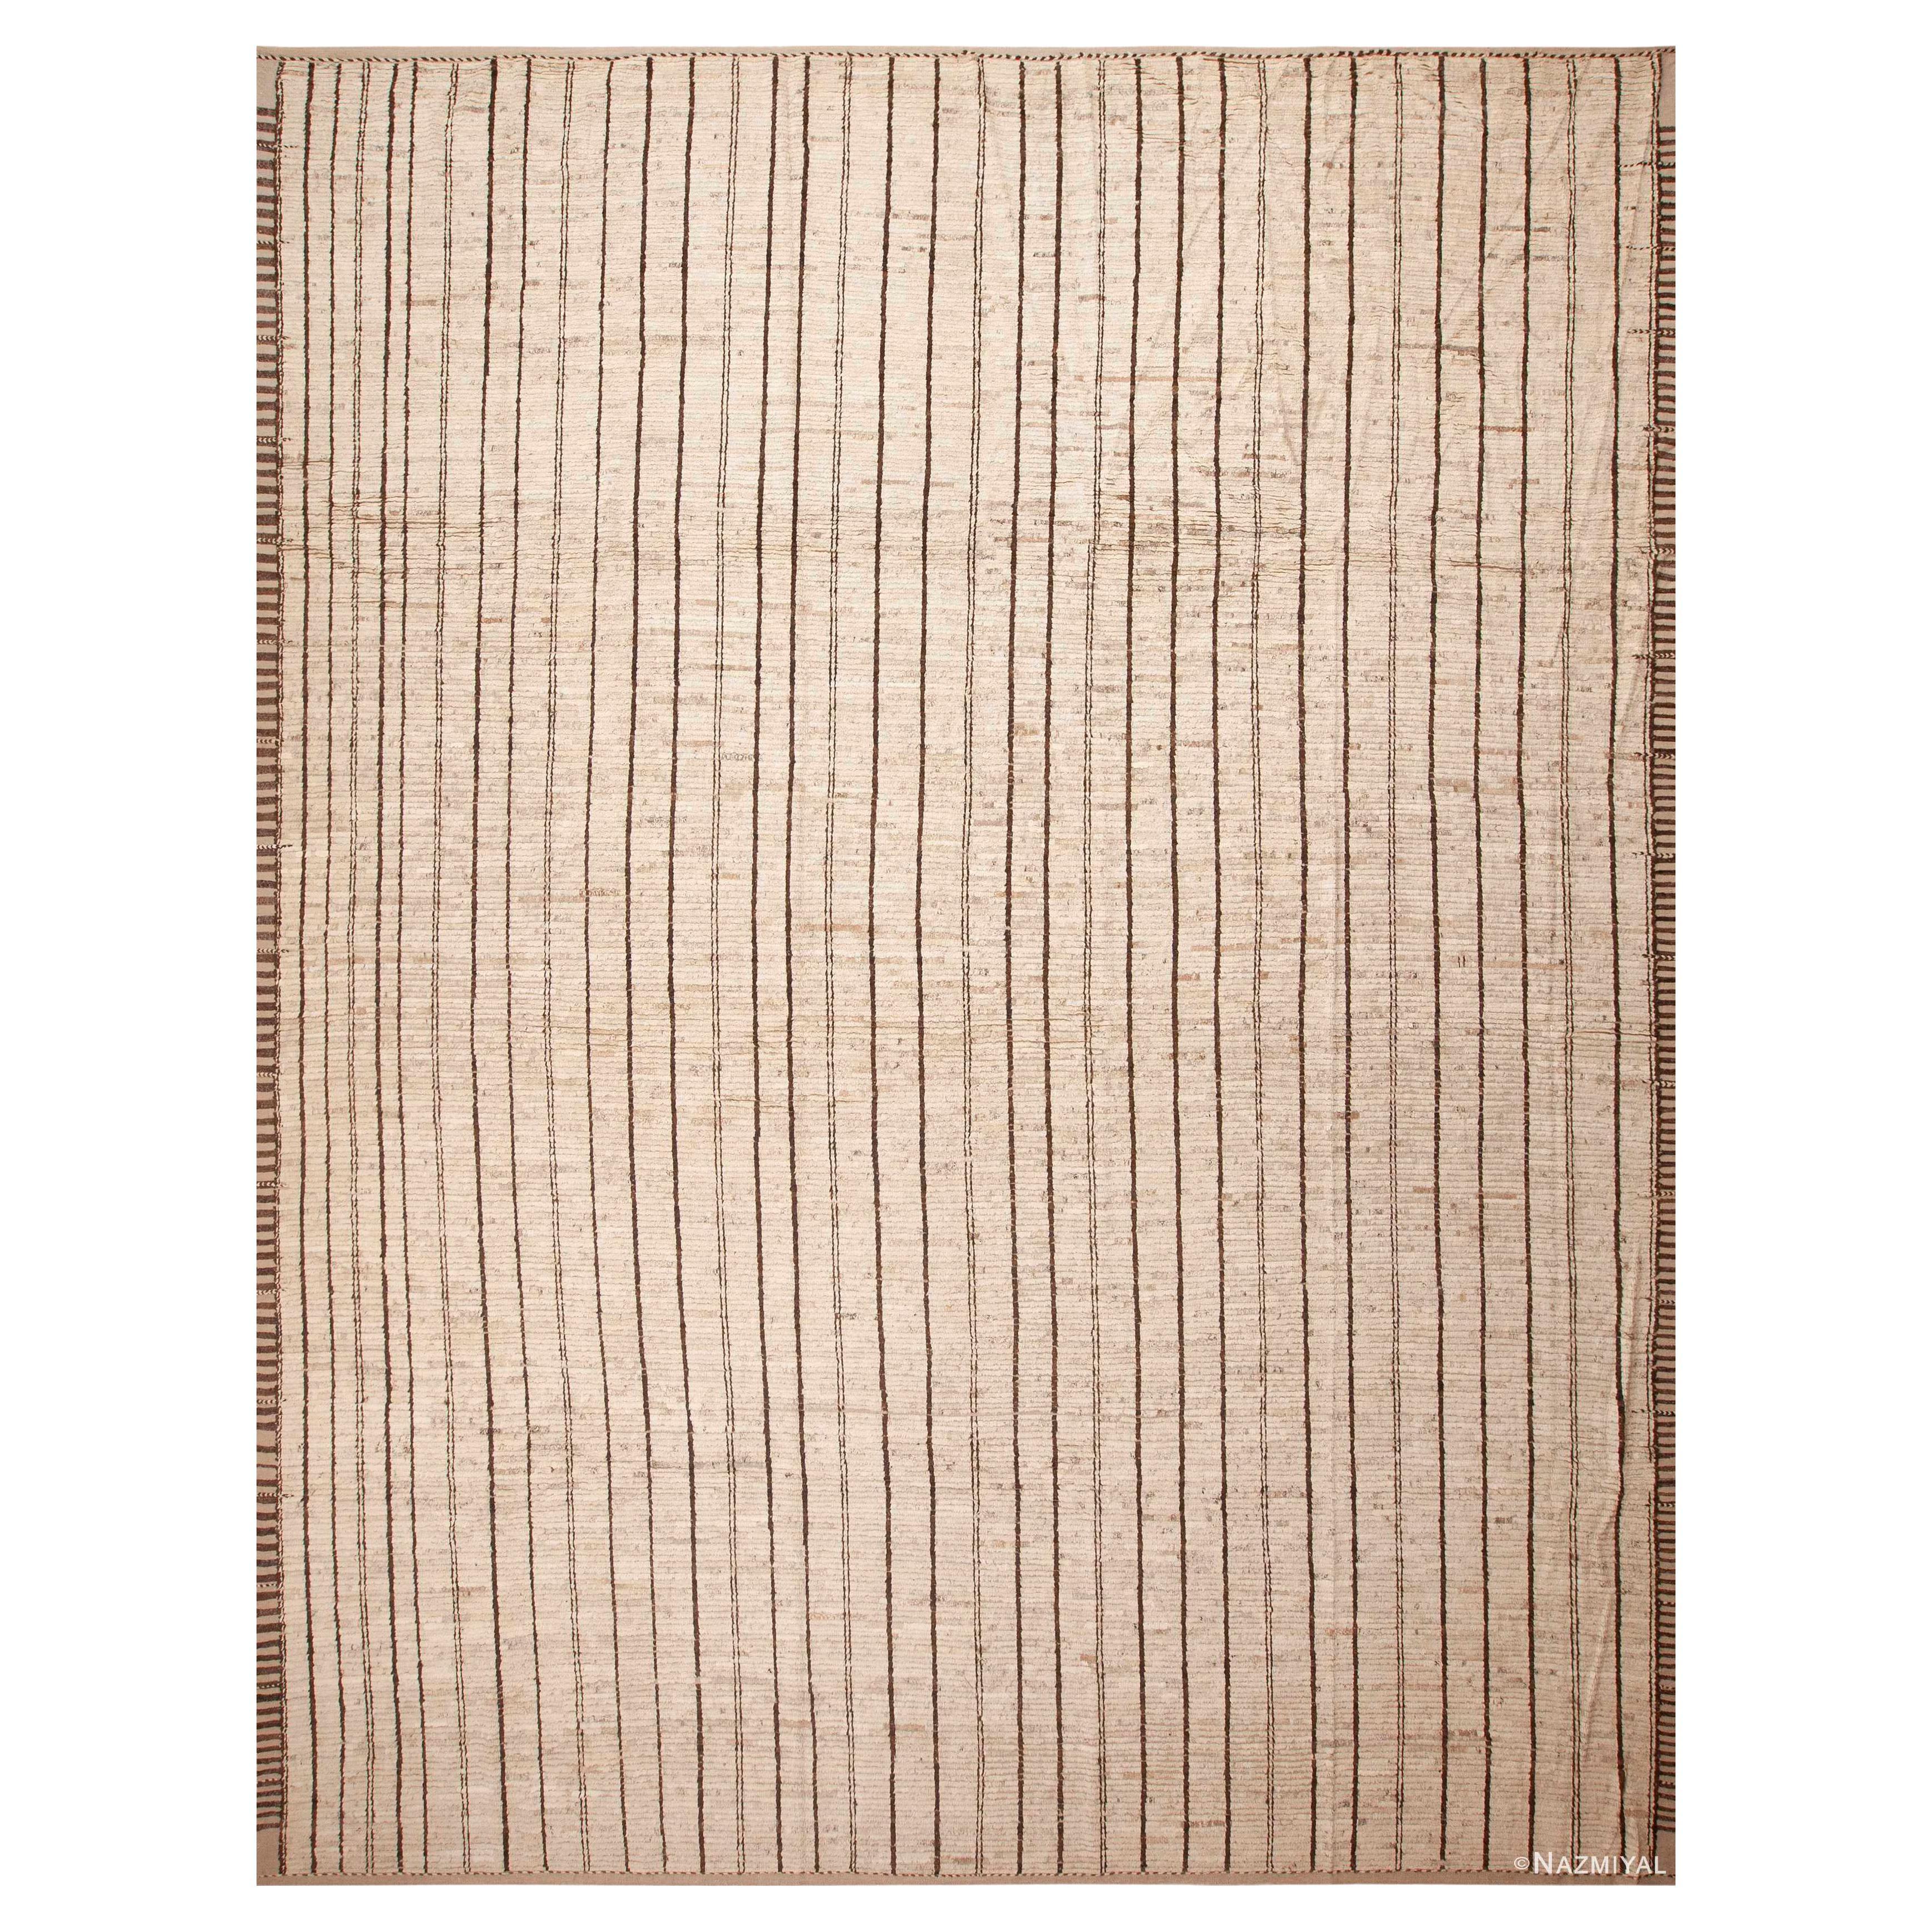 The Collective Minimalist Stripped Pattern Modern Area Rug 14' x 17'7" (collection Nazmiyal Collection Minimaliste à motifs rayés) en vente